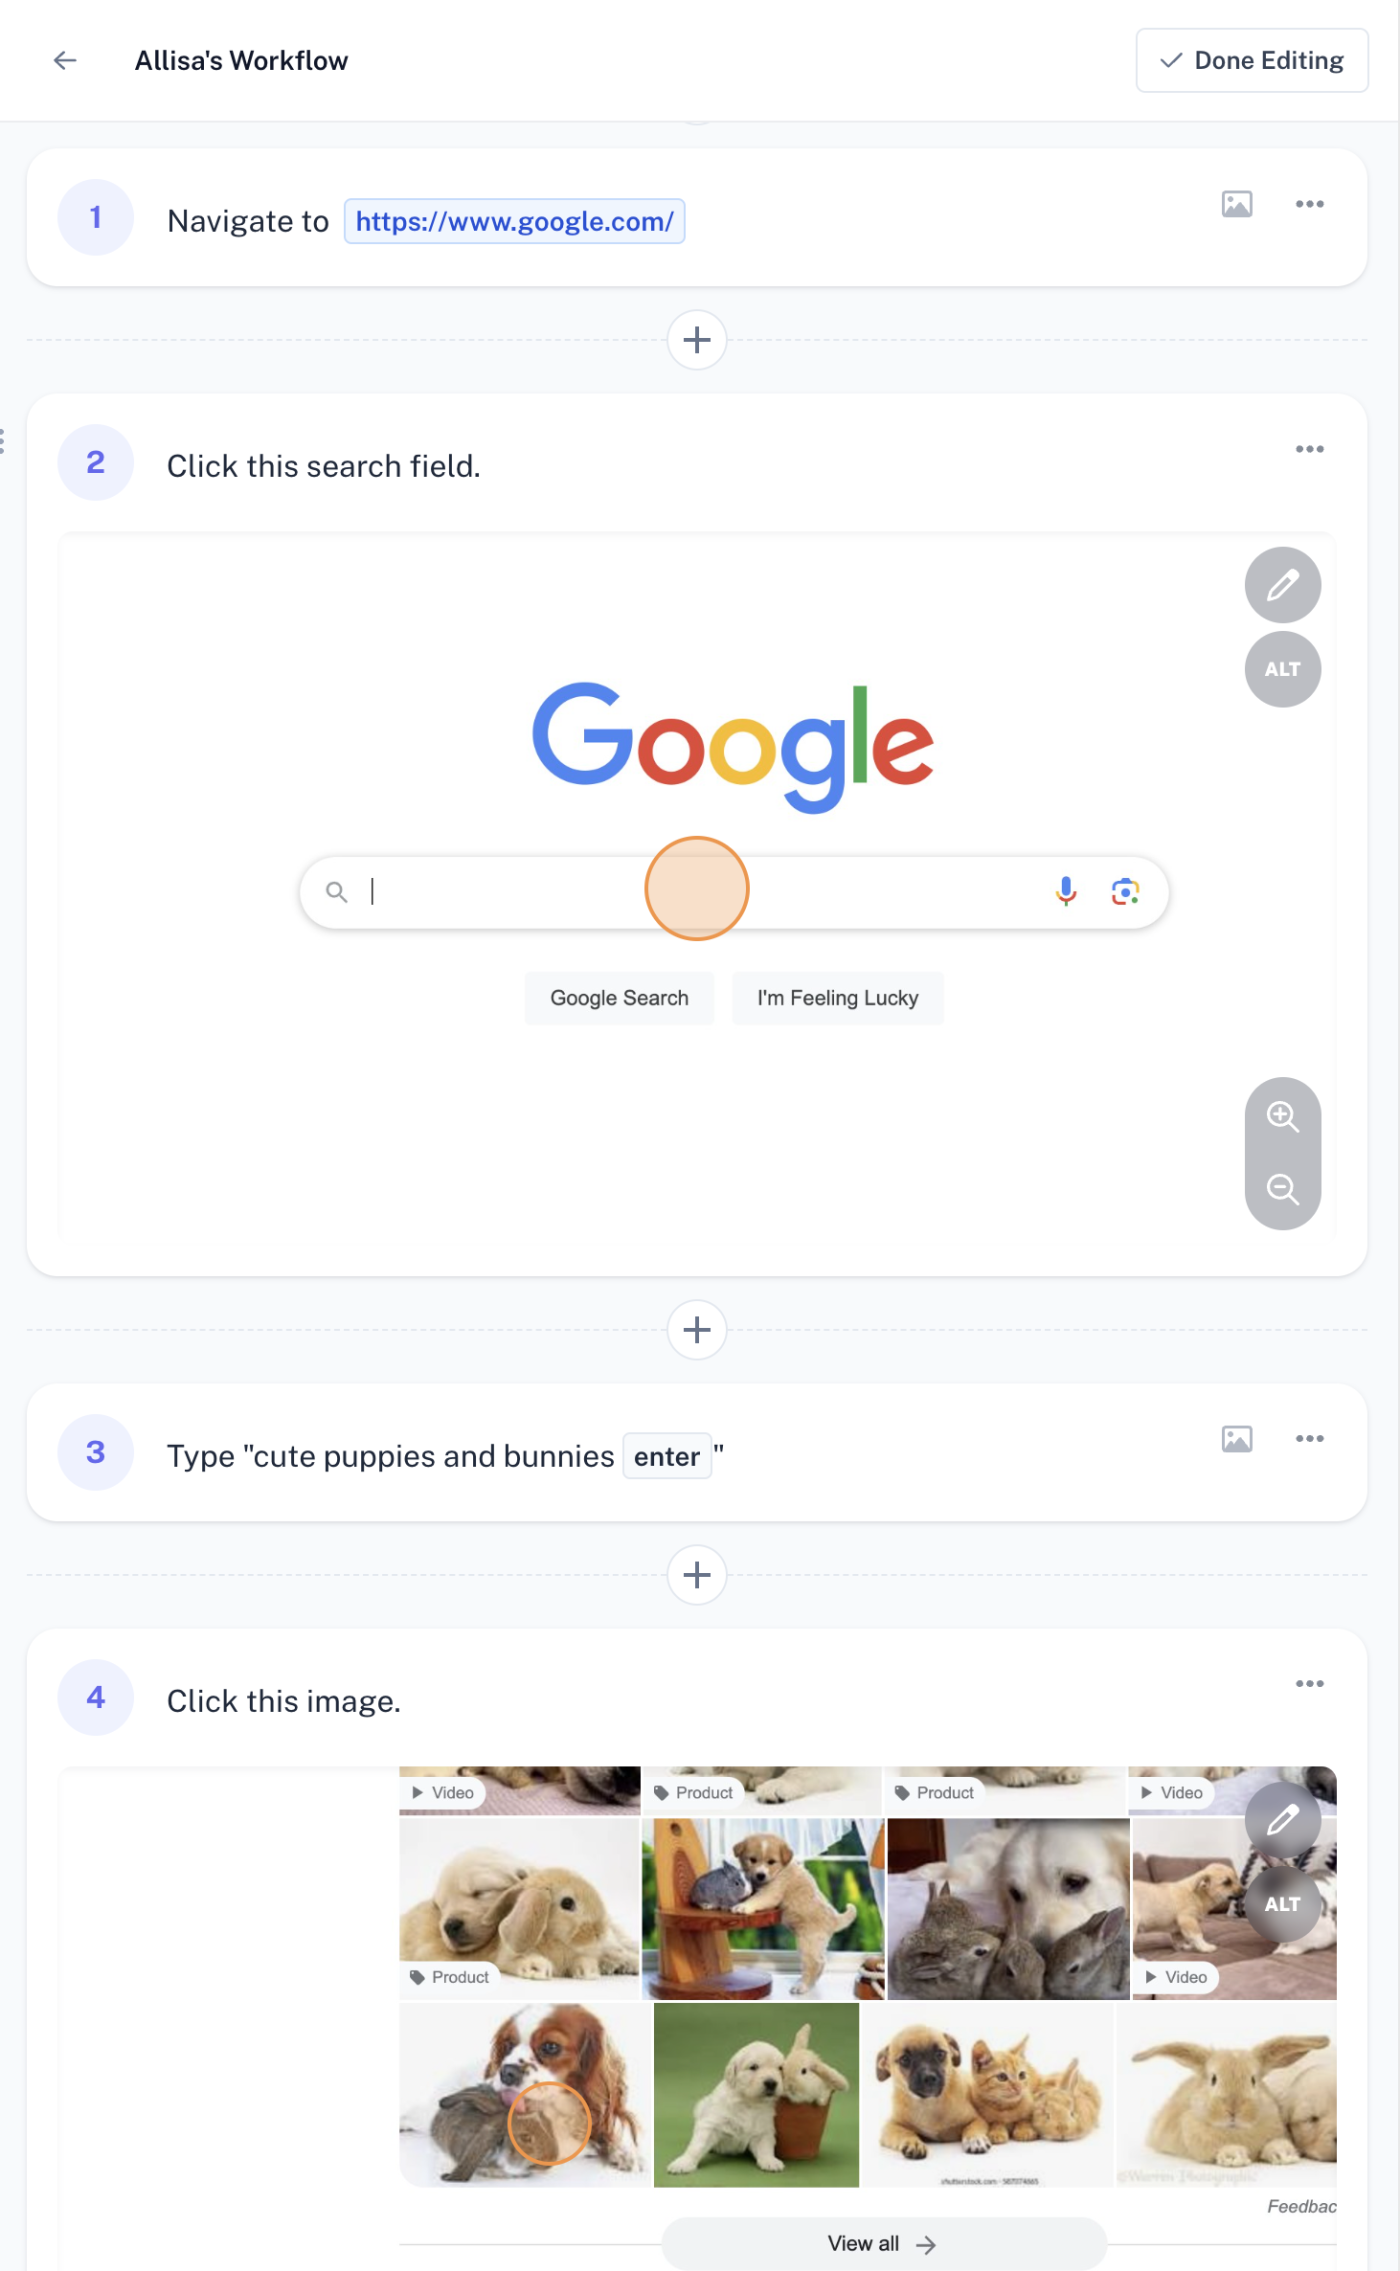 Screenshot of how a user can capture an online task with Scribe, showing how to navigate to Google and search for cute pictures of bunnies and puppies with step-by-step instructions